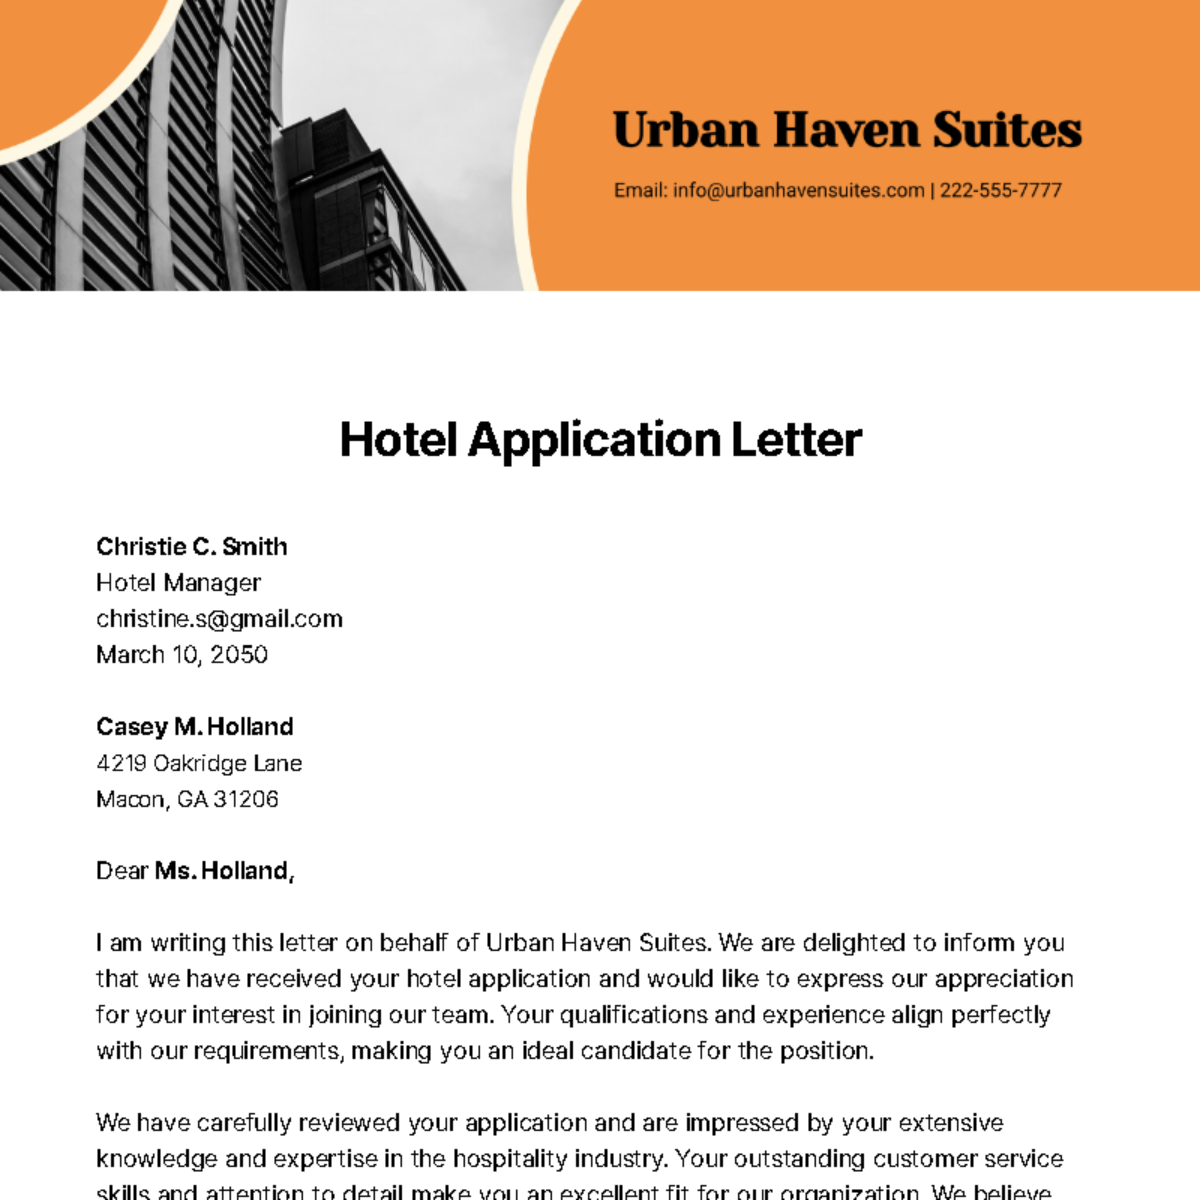 Hotel Application Letter   Template